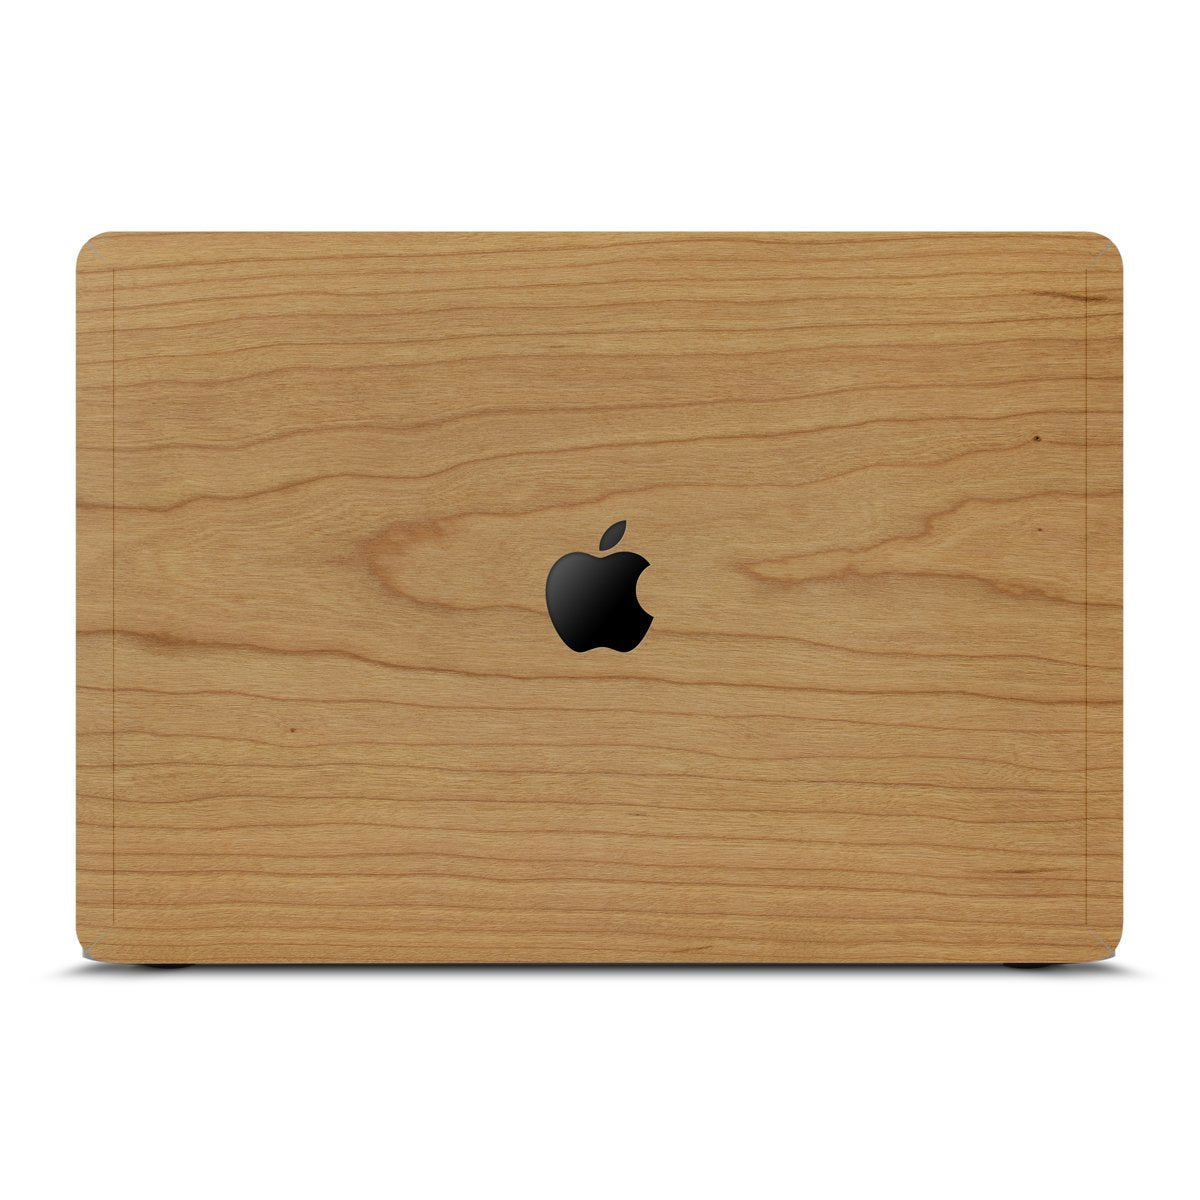 Wooden Skin for MacBook 🌳 Natural Wood. ♻️ Eco-friendly. ✈️ Free Worldwide Shipping. 🎁 Perfect Gift.